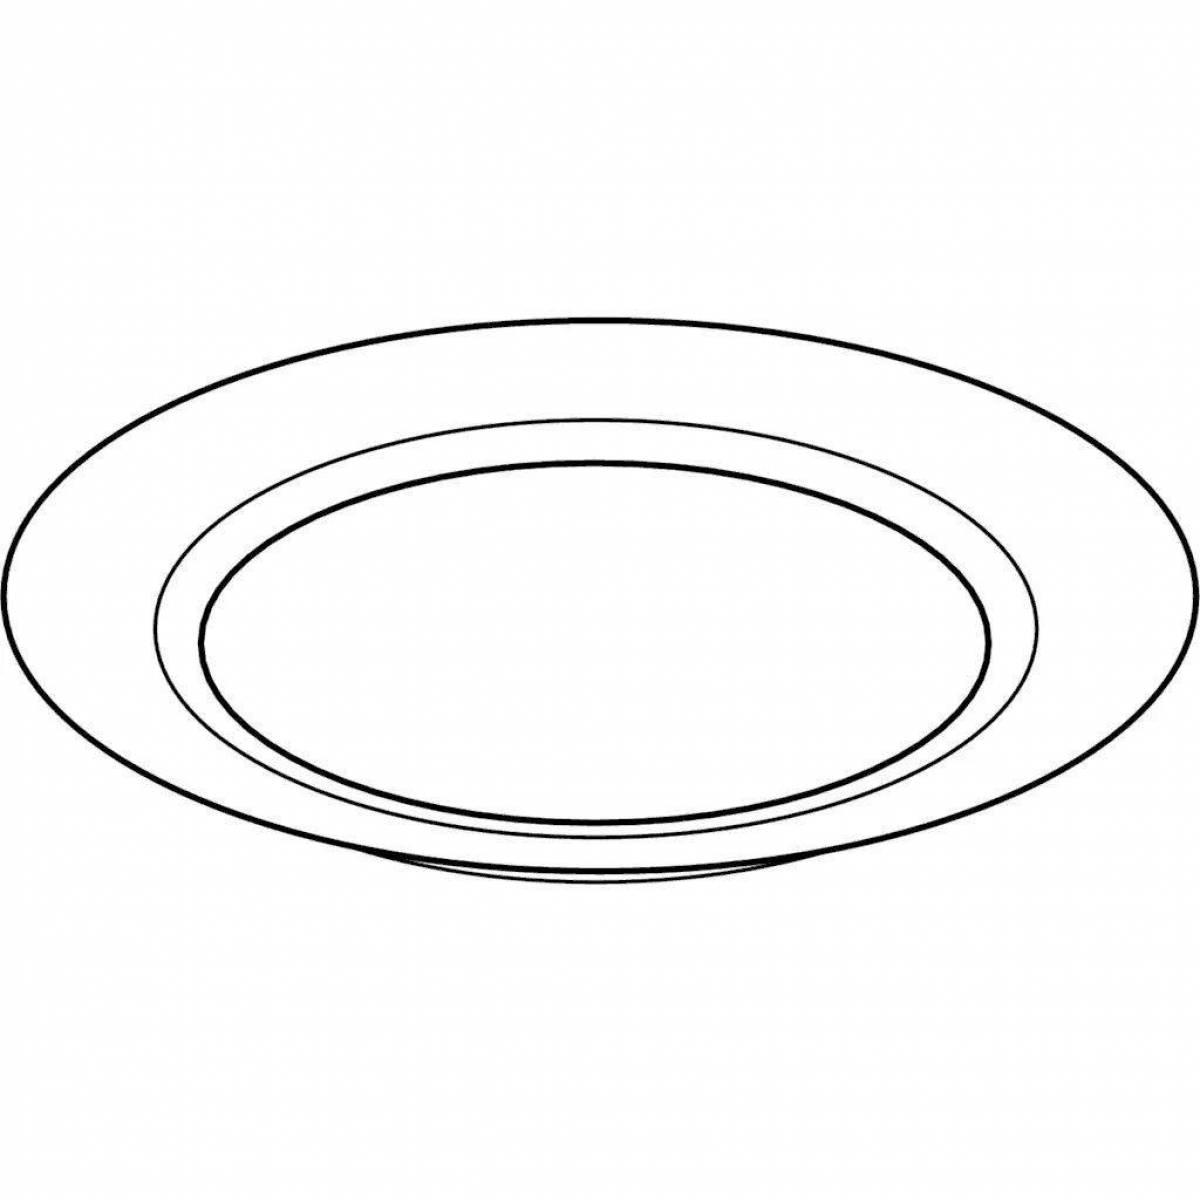 Colorful saucer coloring page for kids